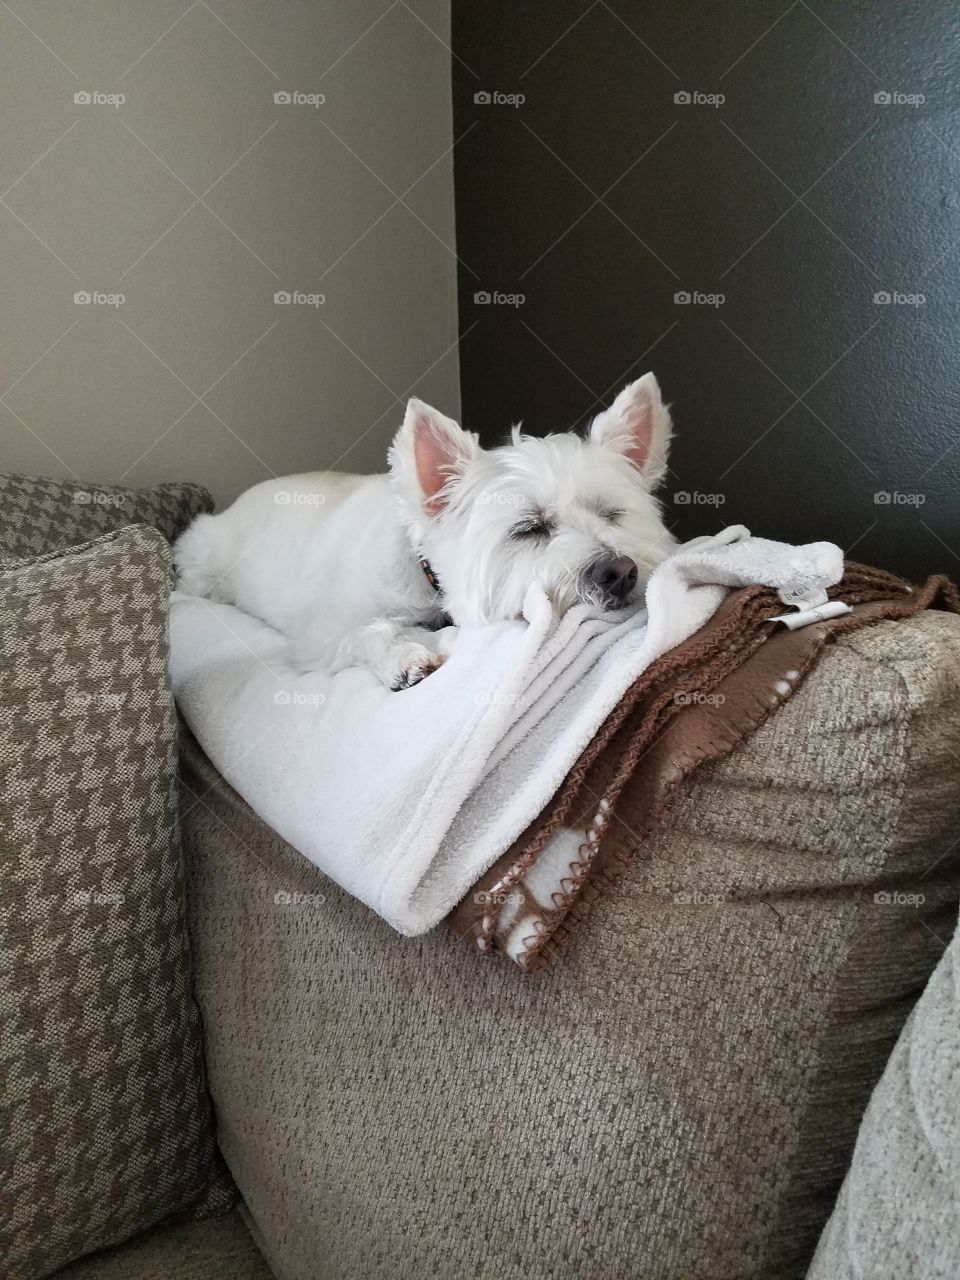 cute westie takes a nap on the comfy couch